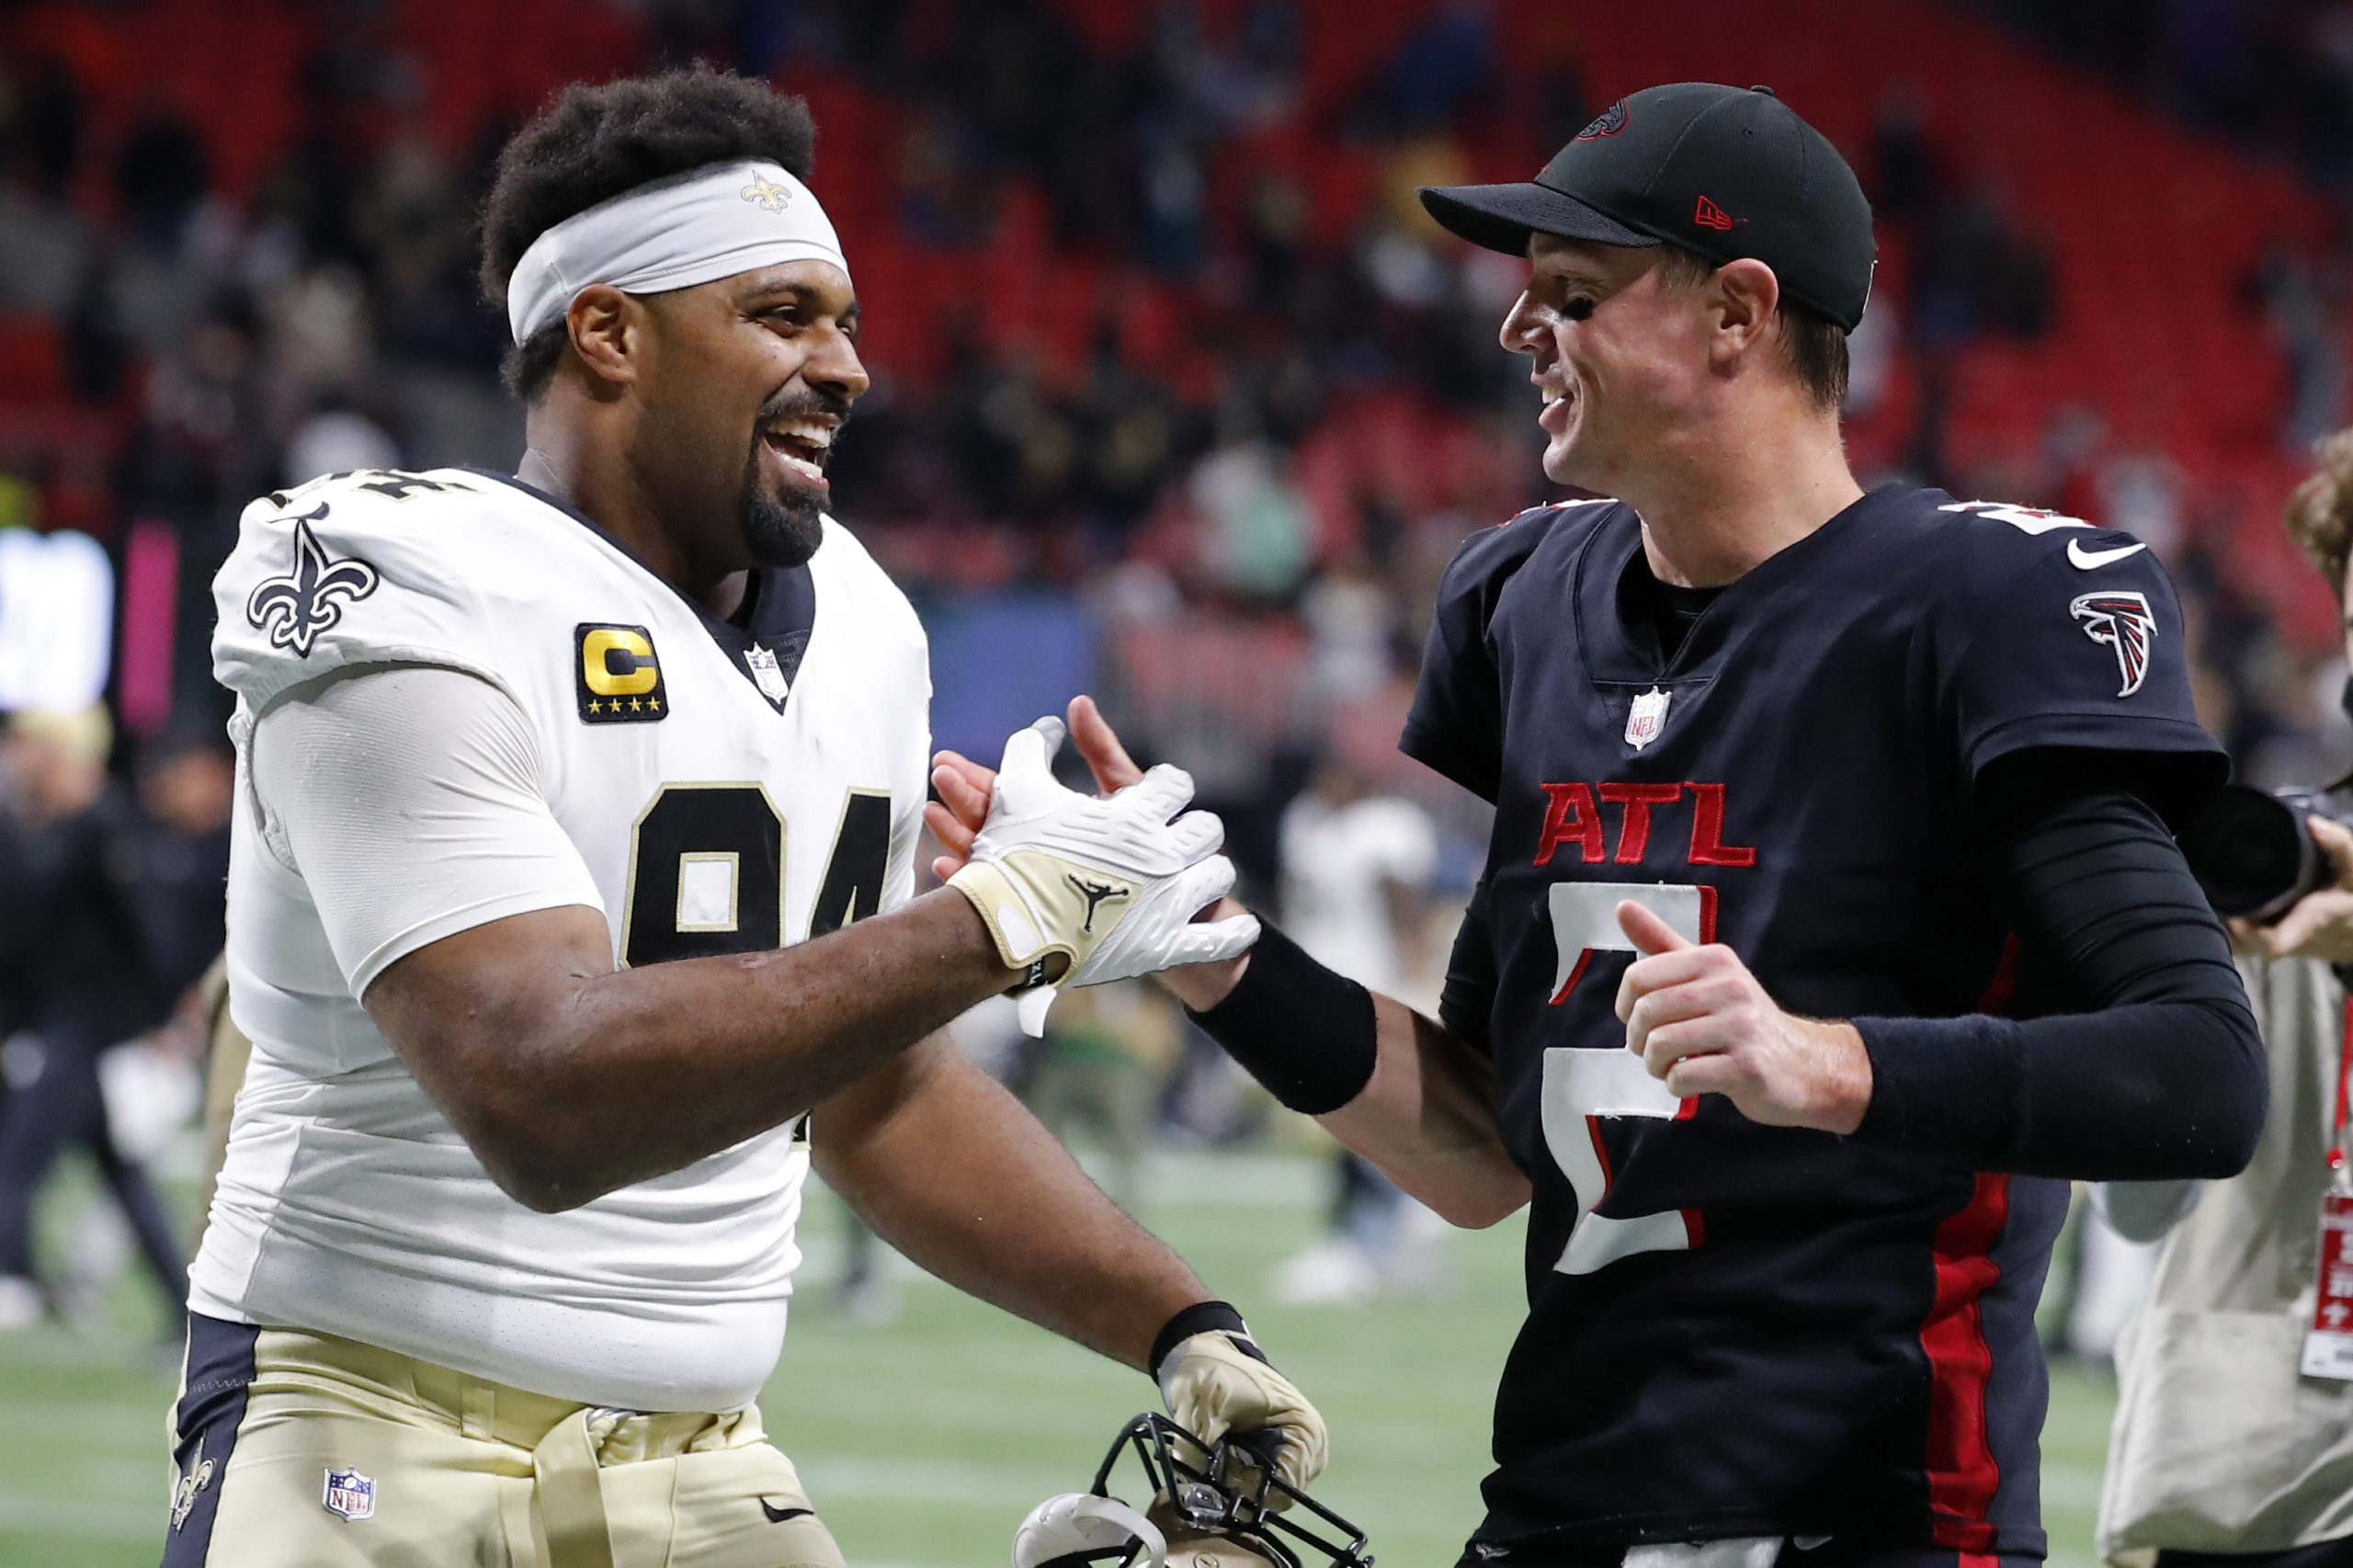 ATLANTA, GEORGIA - JANUARY 09: Matt Ryan #2 of the Atlanta Falcons talks with Cameron Jordan #94 of the New Orleans Saints after the game at Mercedes-Benz Stadium on January 09, 2022 in Atlanta, Georgia. Todd Kirkland/Getty Images